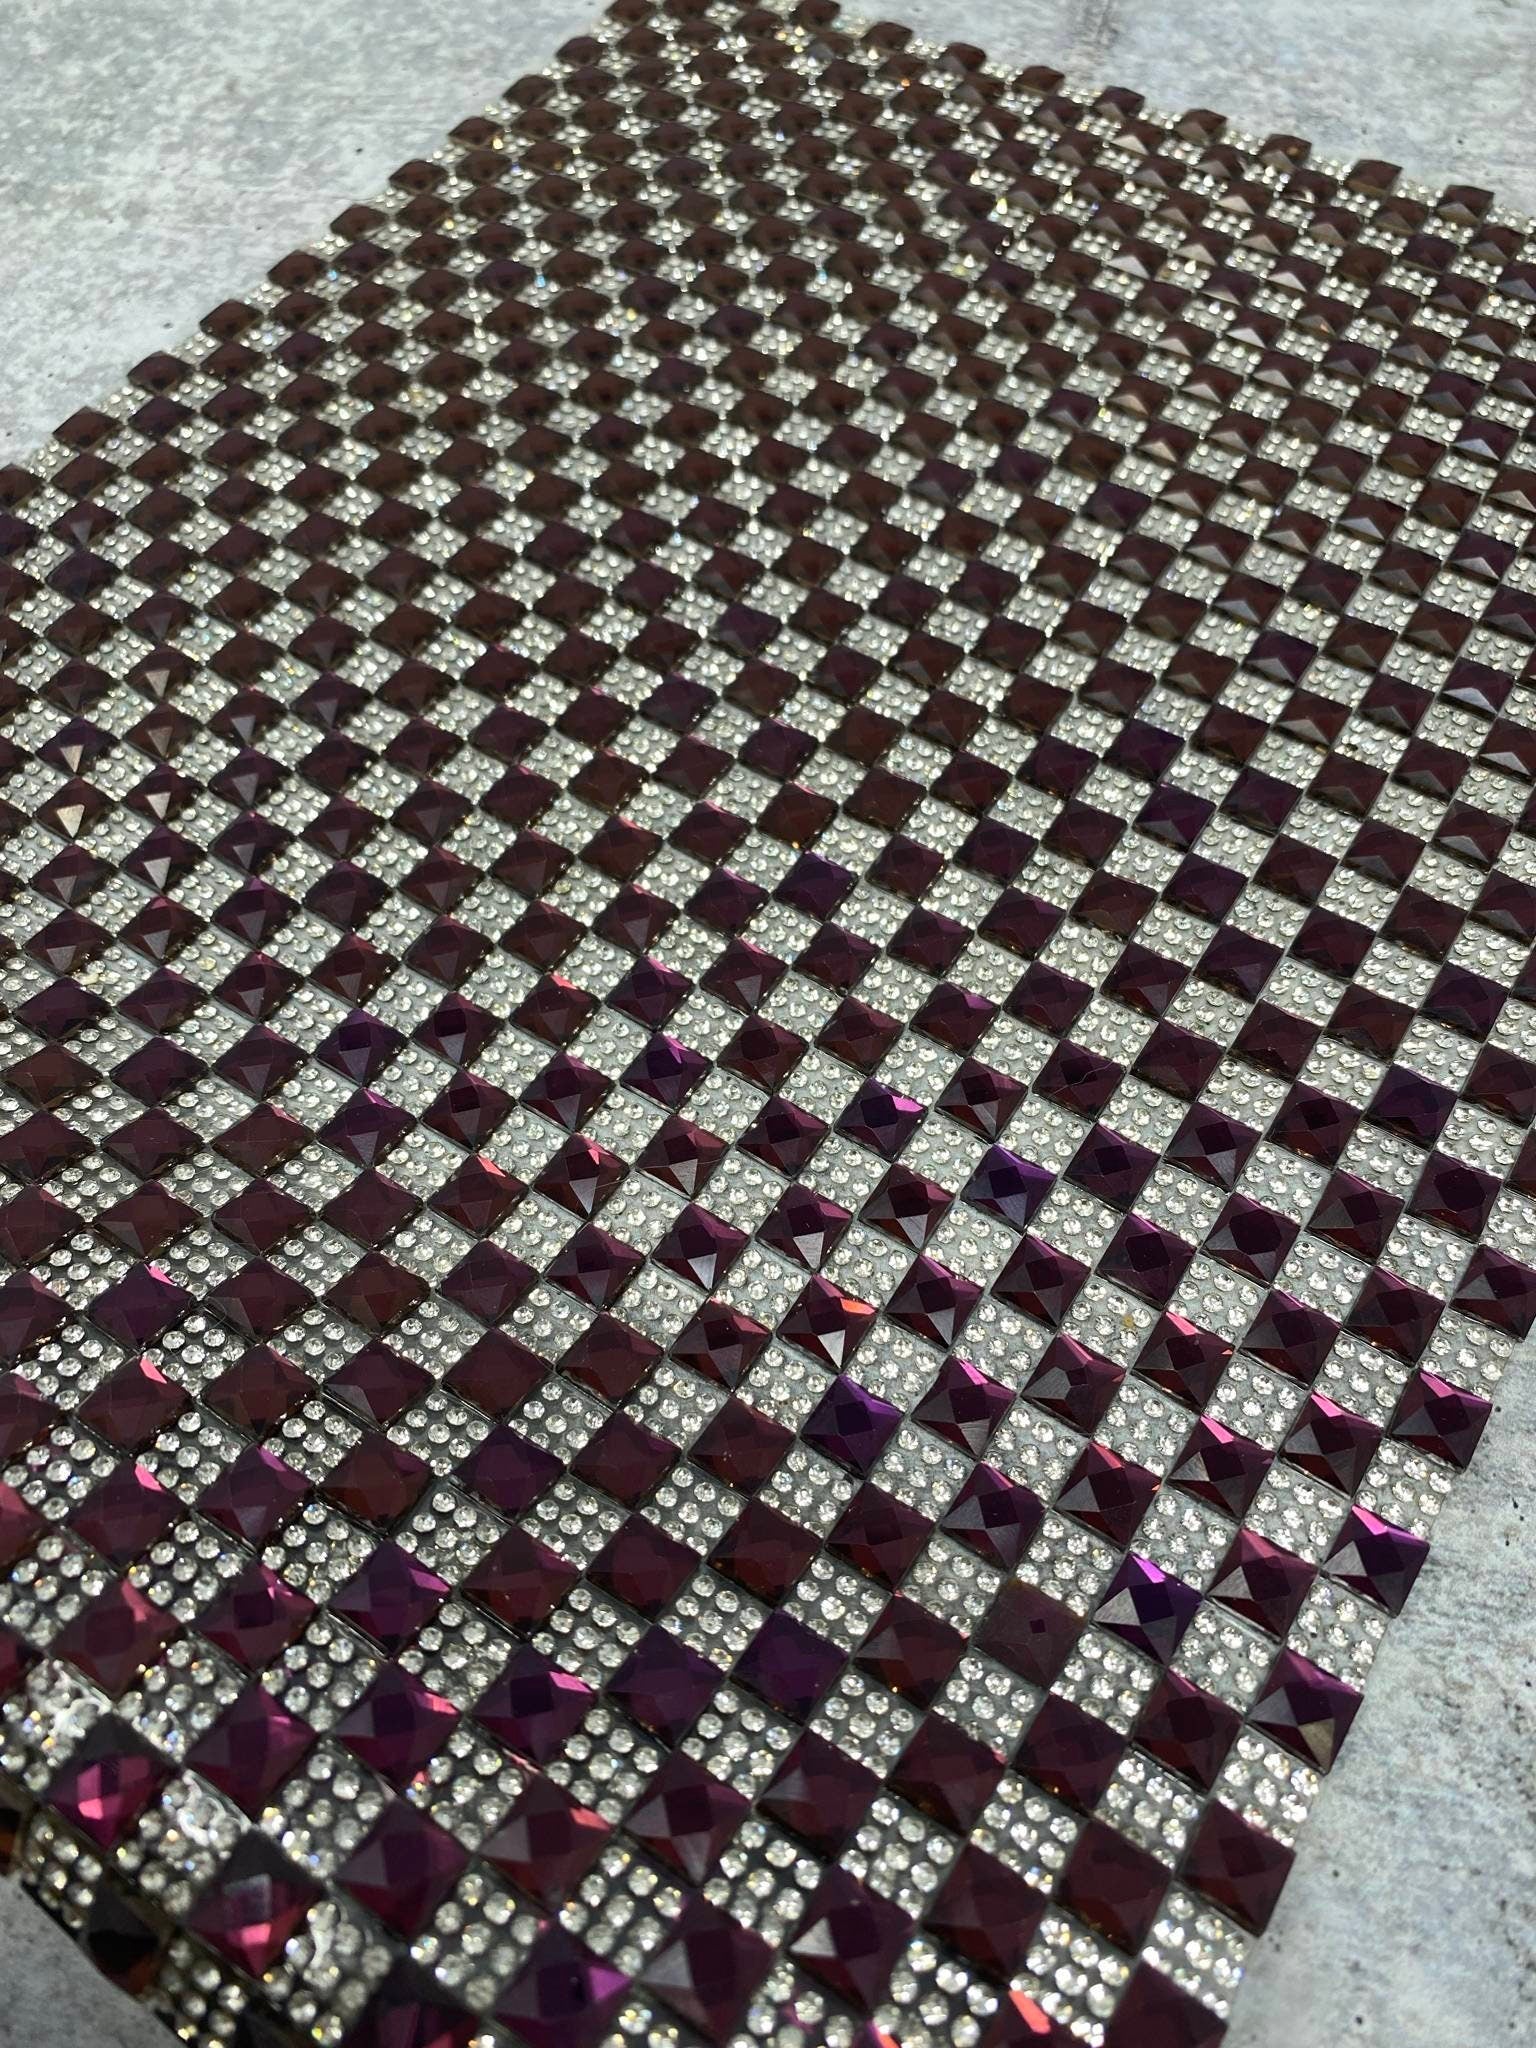 Glass "PURPLE & Silver" Squares,Hot-fix Rhinestone Sheet for Crafts Blinging: Shoes, Handbags, Wine Glasses and More, 10" x 16.5" sz